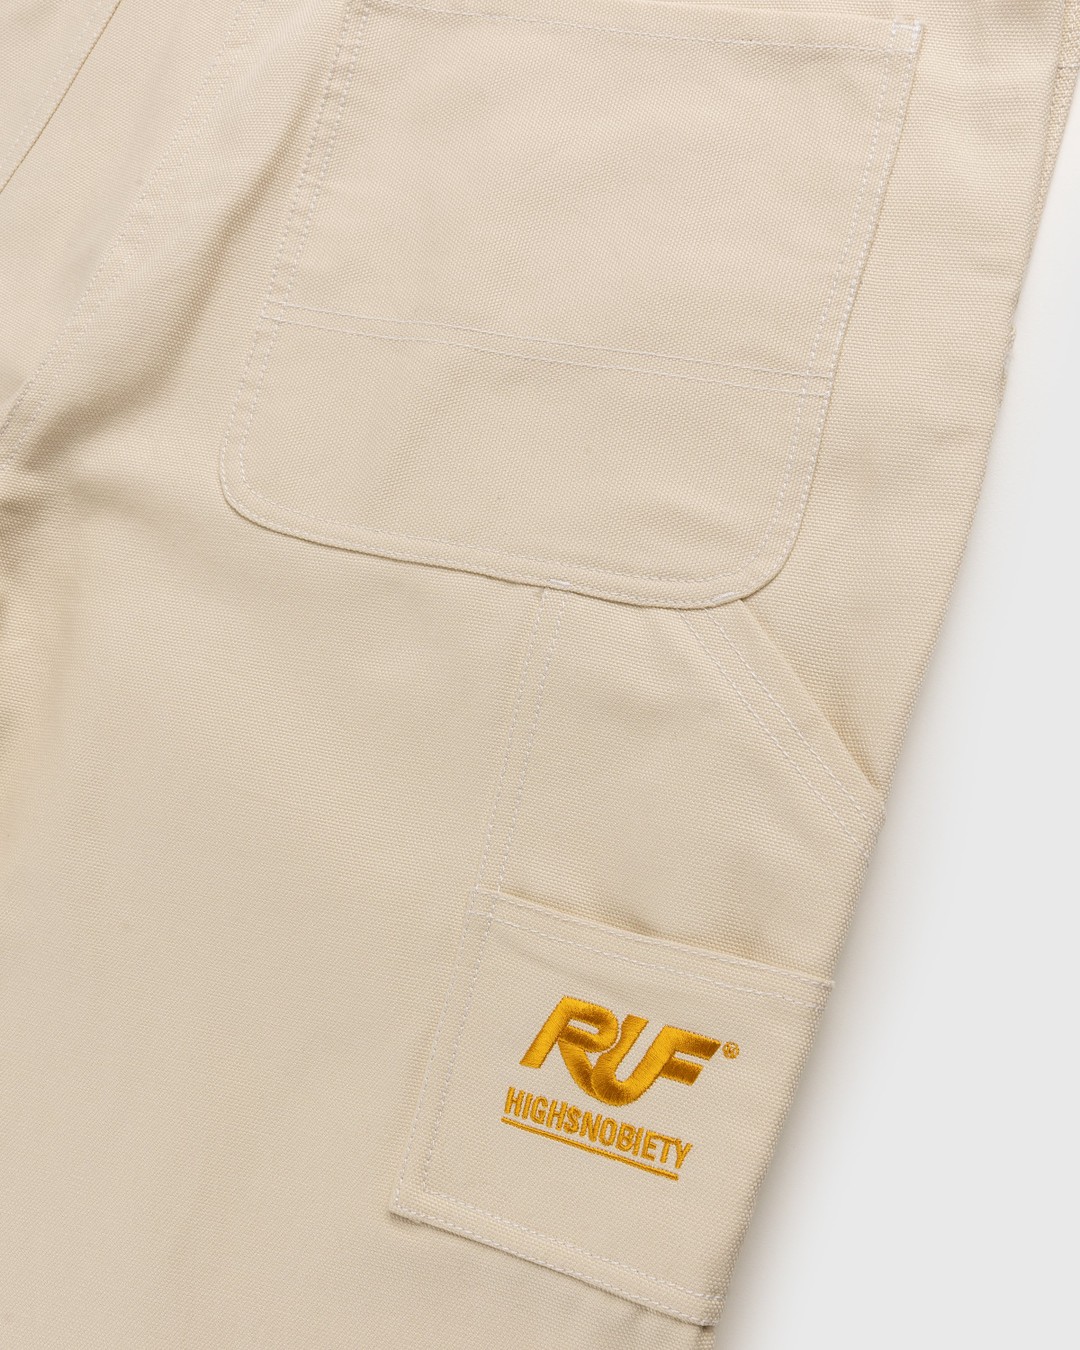 RUF x Highsnobiety – Cotton Overalls Natural - Pants - Beige - Image 4